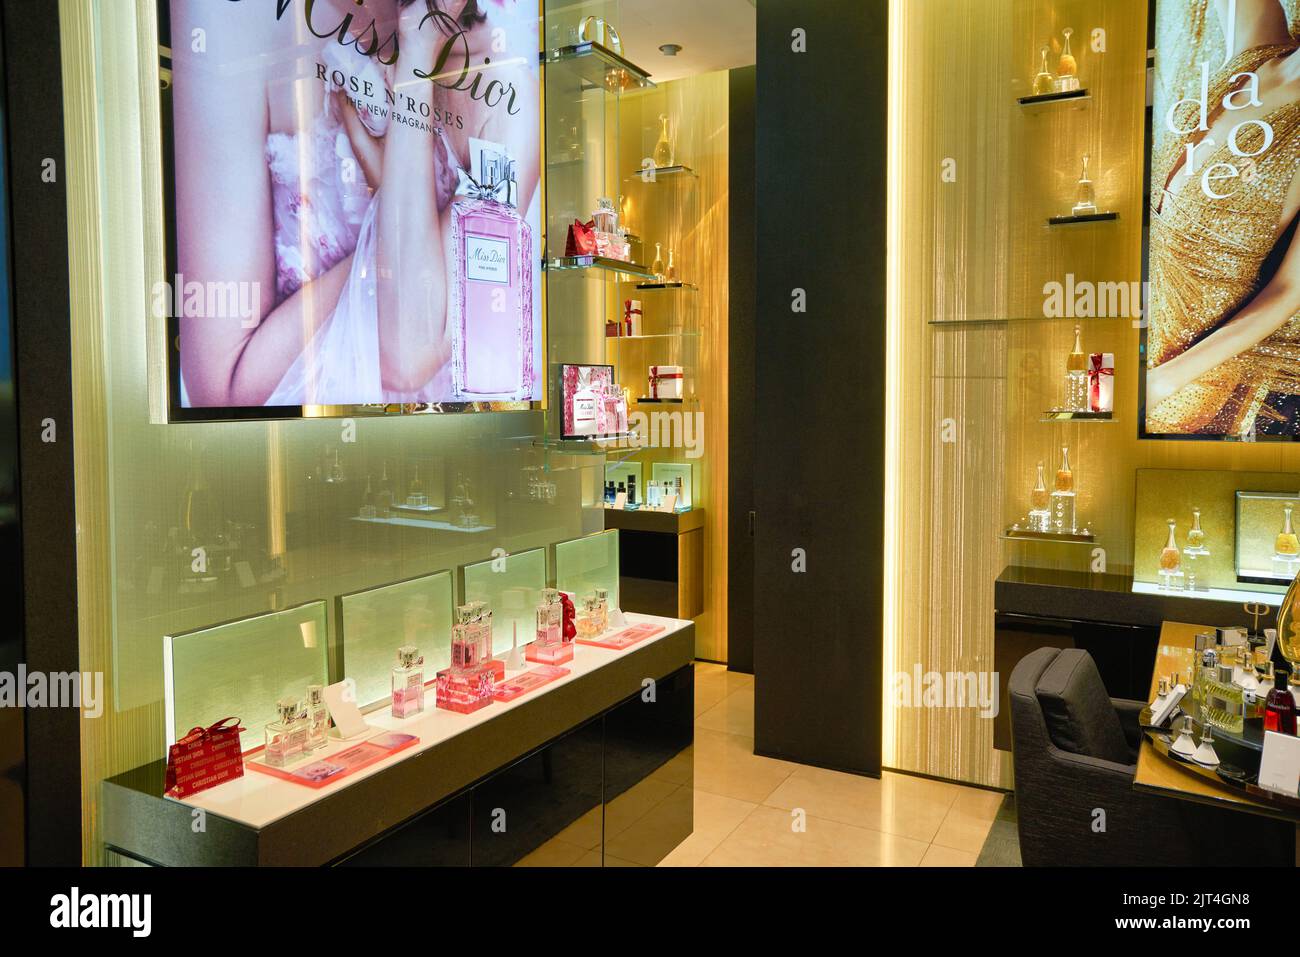 SINGAPORE - JANUARY 20, 2020: interior shot of Christian Dior store in the Shoppes at Marina Bay Sands in Singapore. Dior is a French luxury goods com Stock Photo